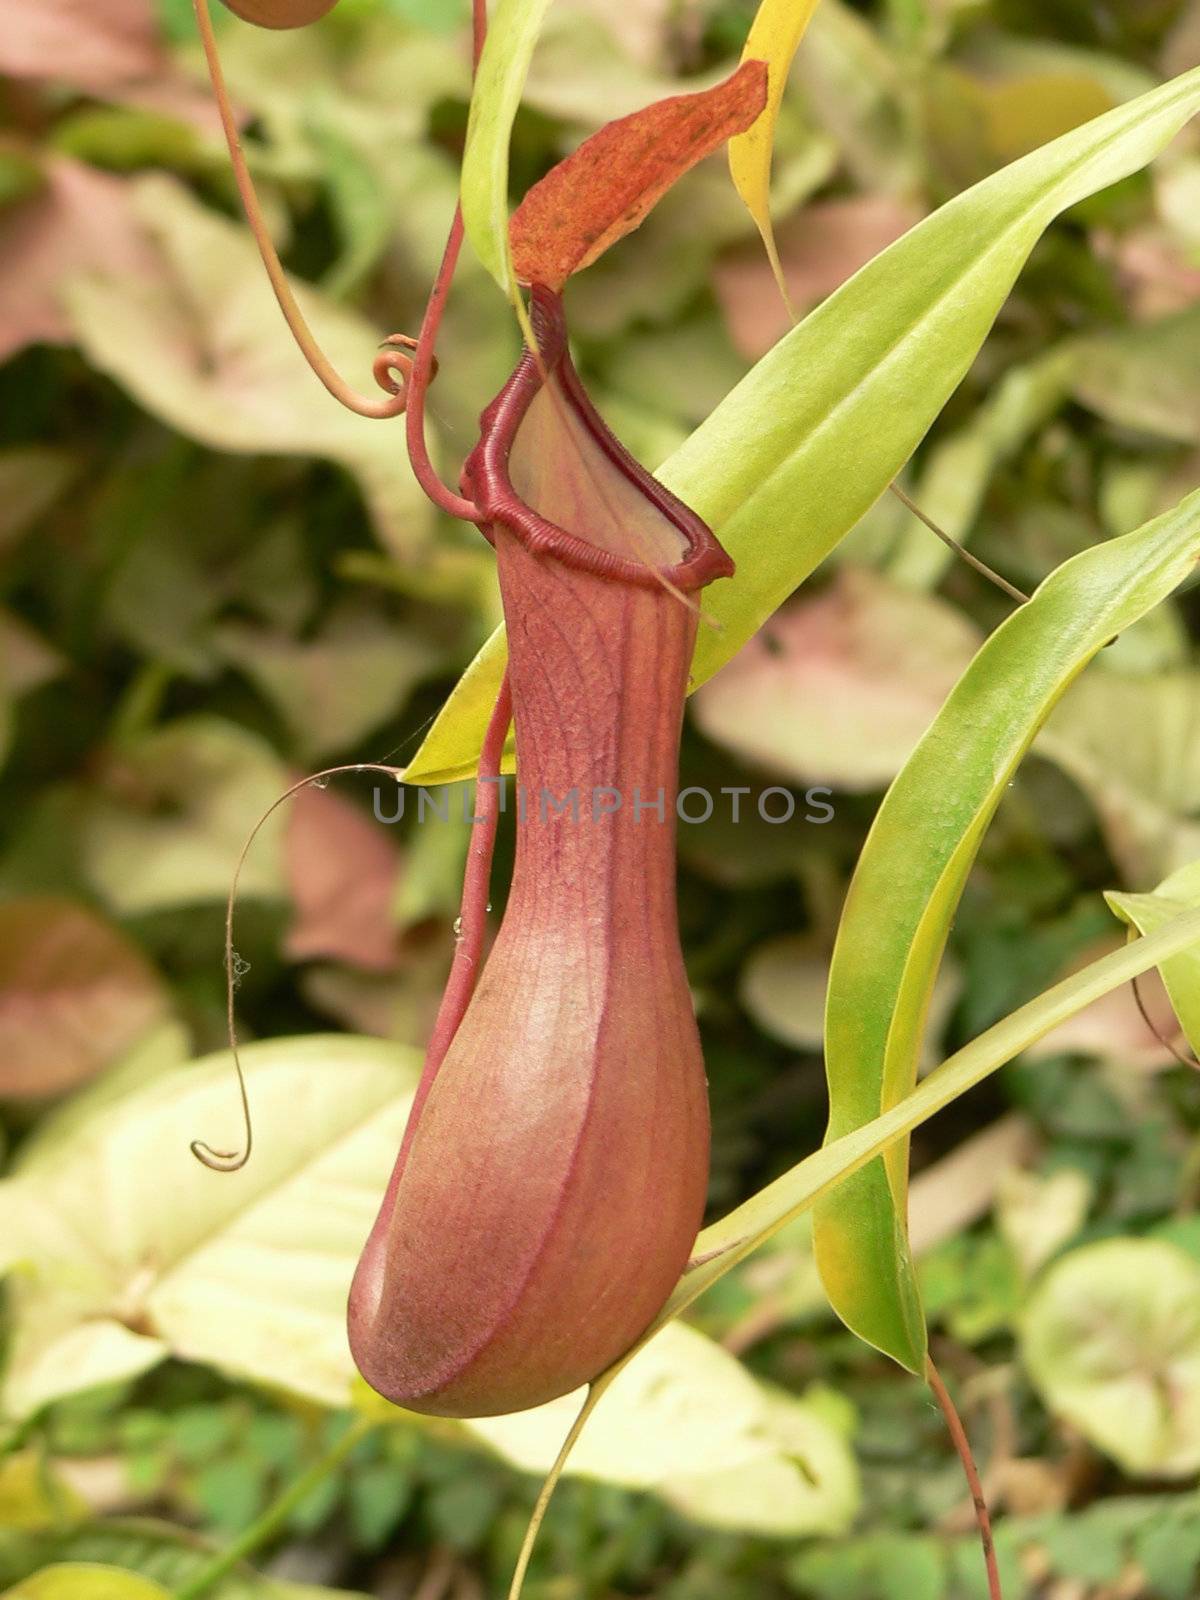 Carnivorous plant by EveStock